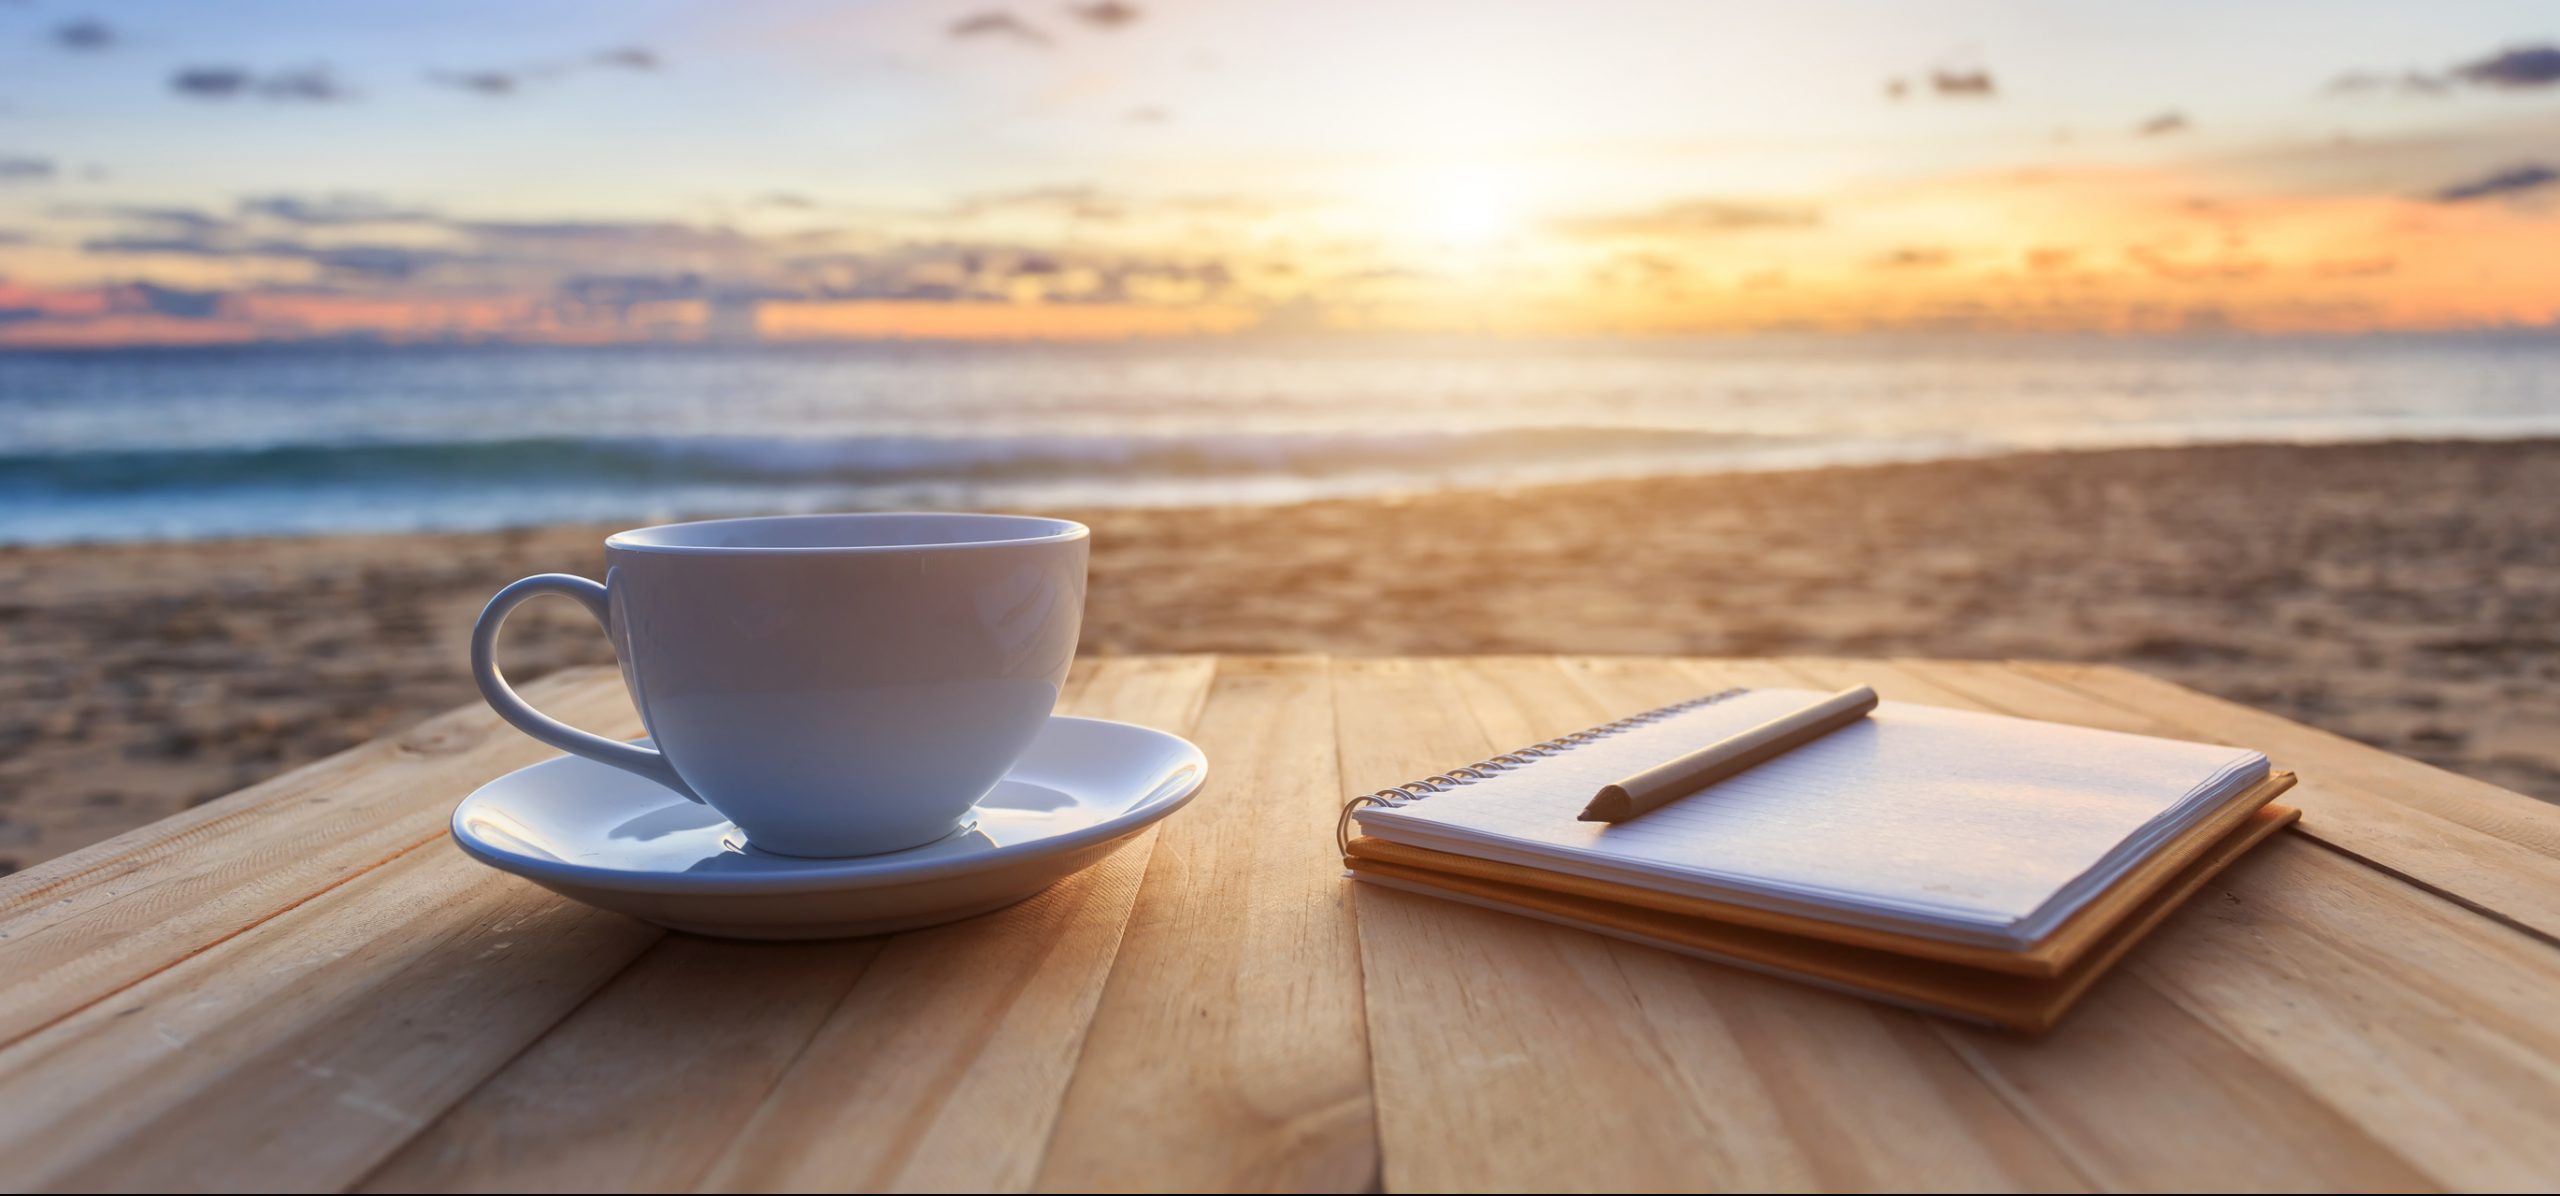 Coffee and note pad on table overlooking beach sunset